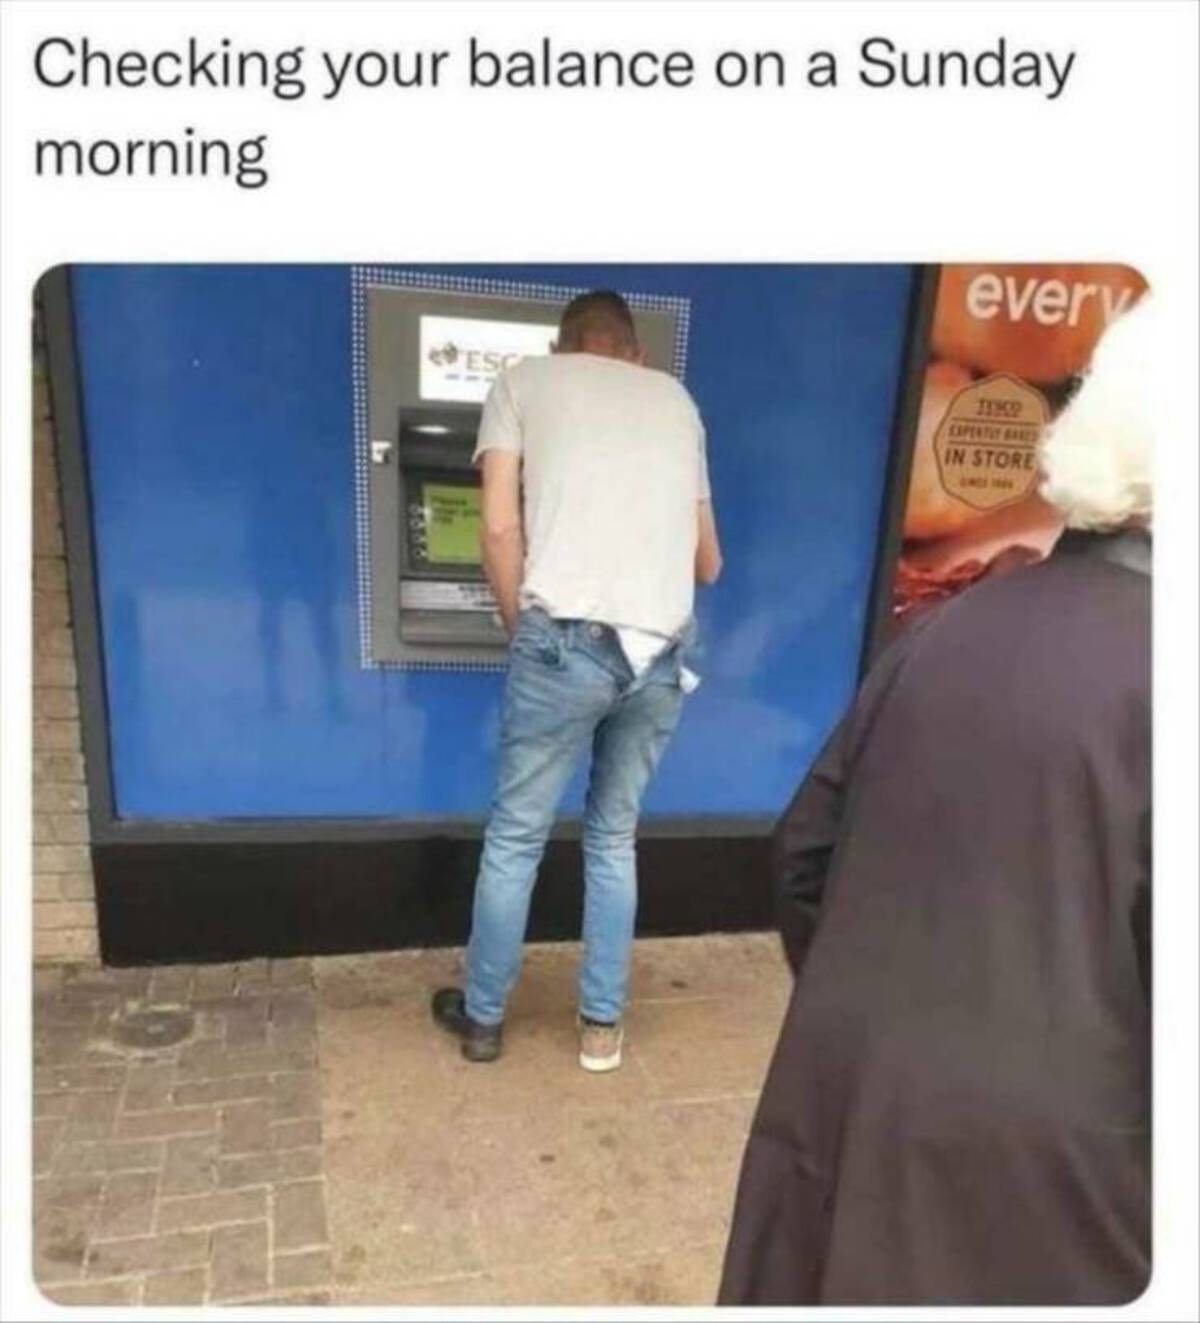 checking your balance on a sunday morning - Checking your balance on a Sunday morning Esc every JIK9 Expertly Baked In Store